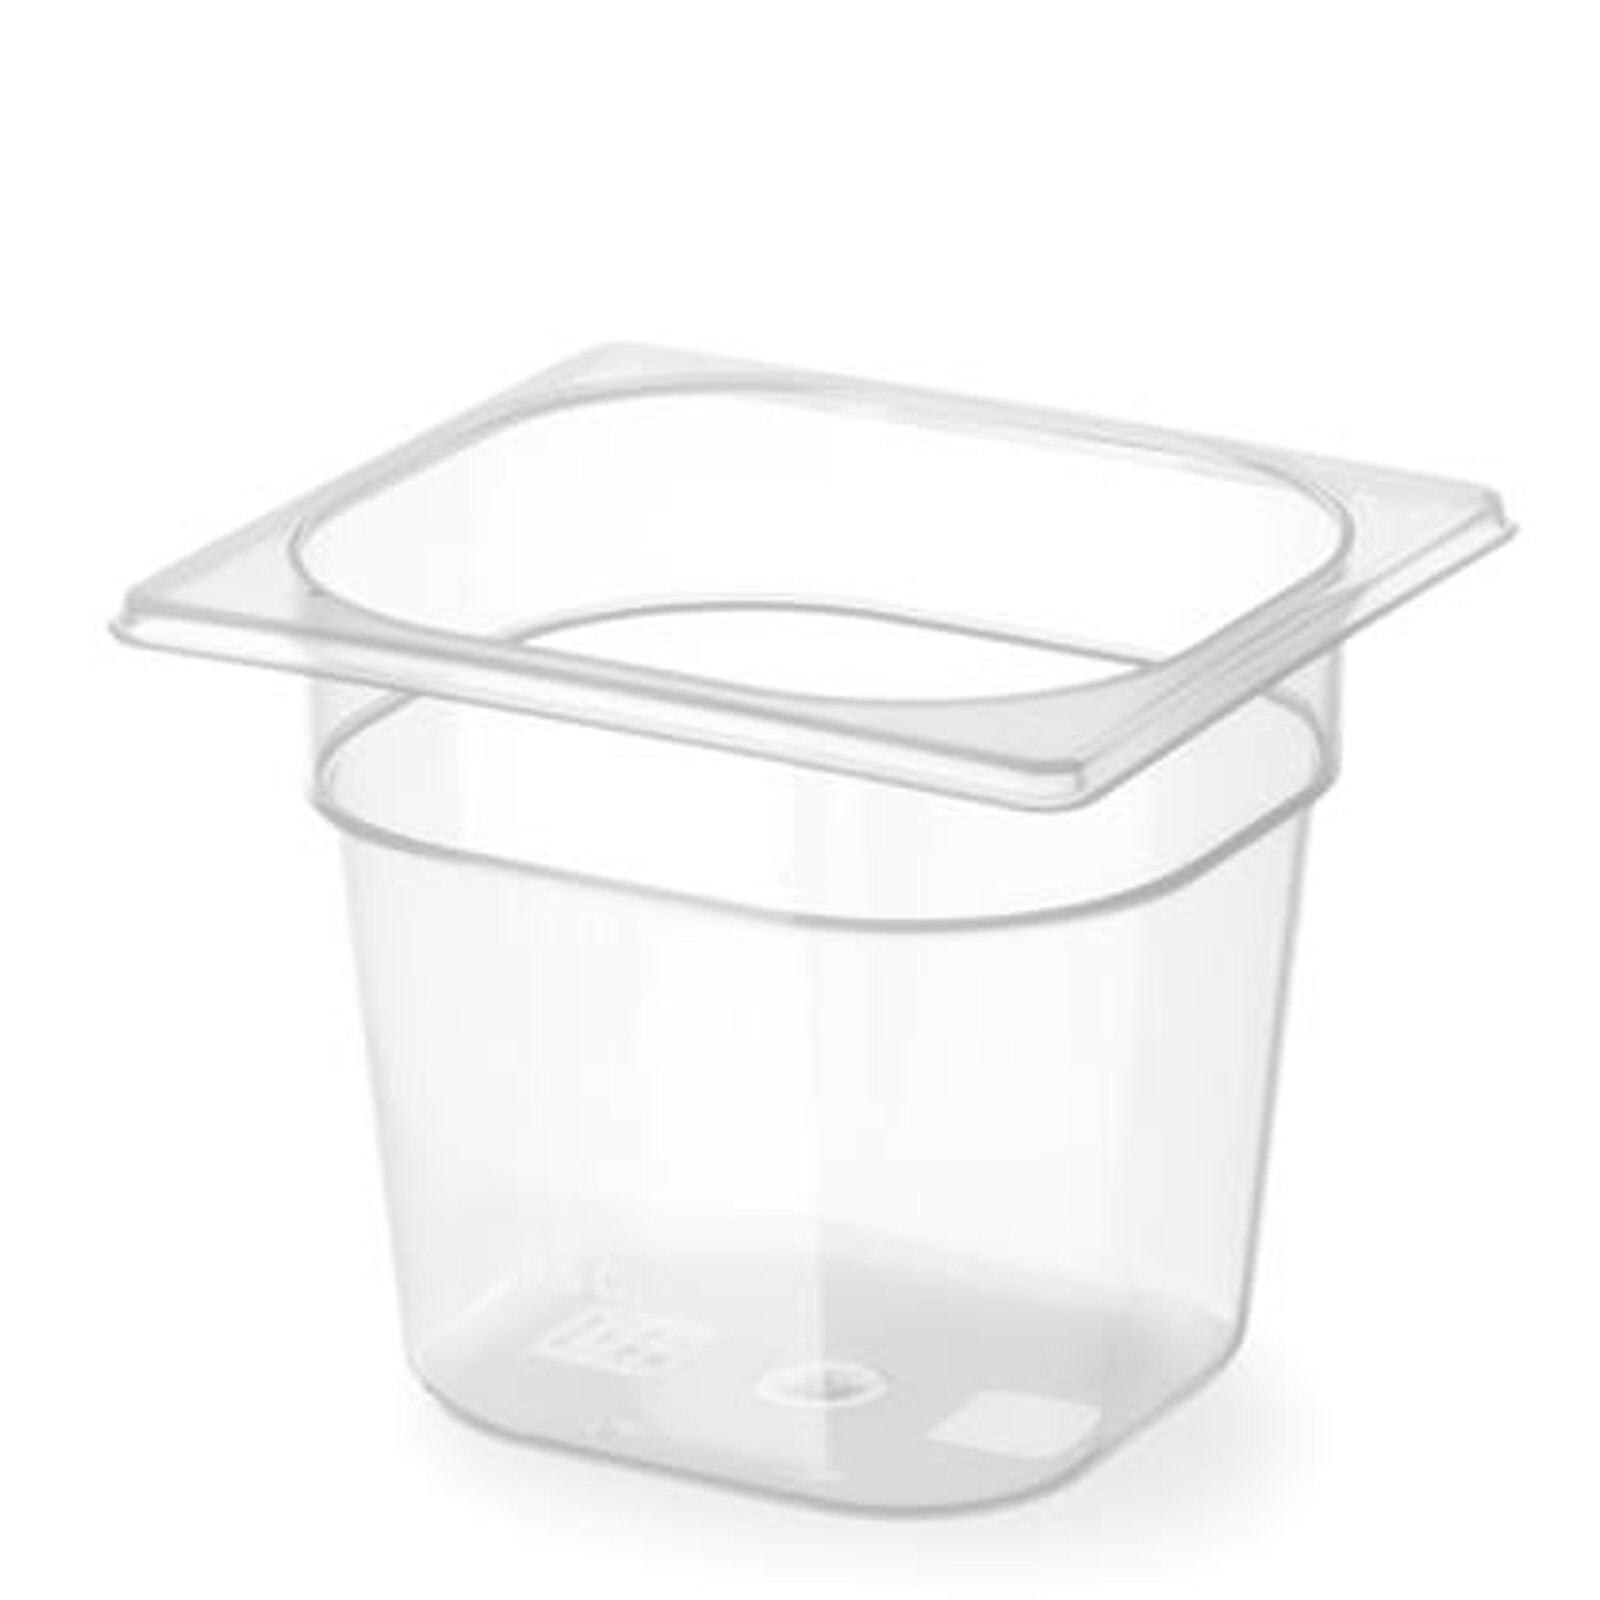 Gastronomy container made of polypropylene GN 1/6 height 200 mm - Hendi 880401